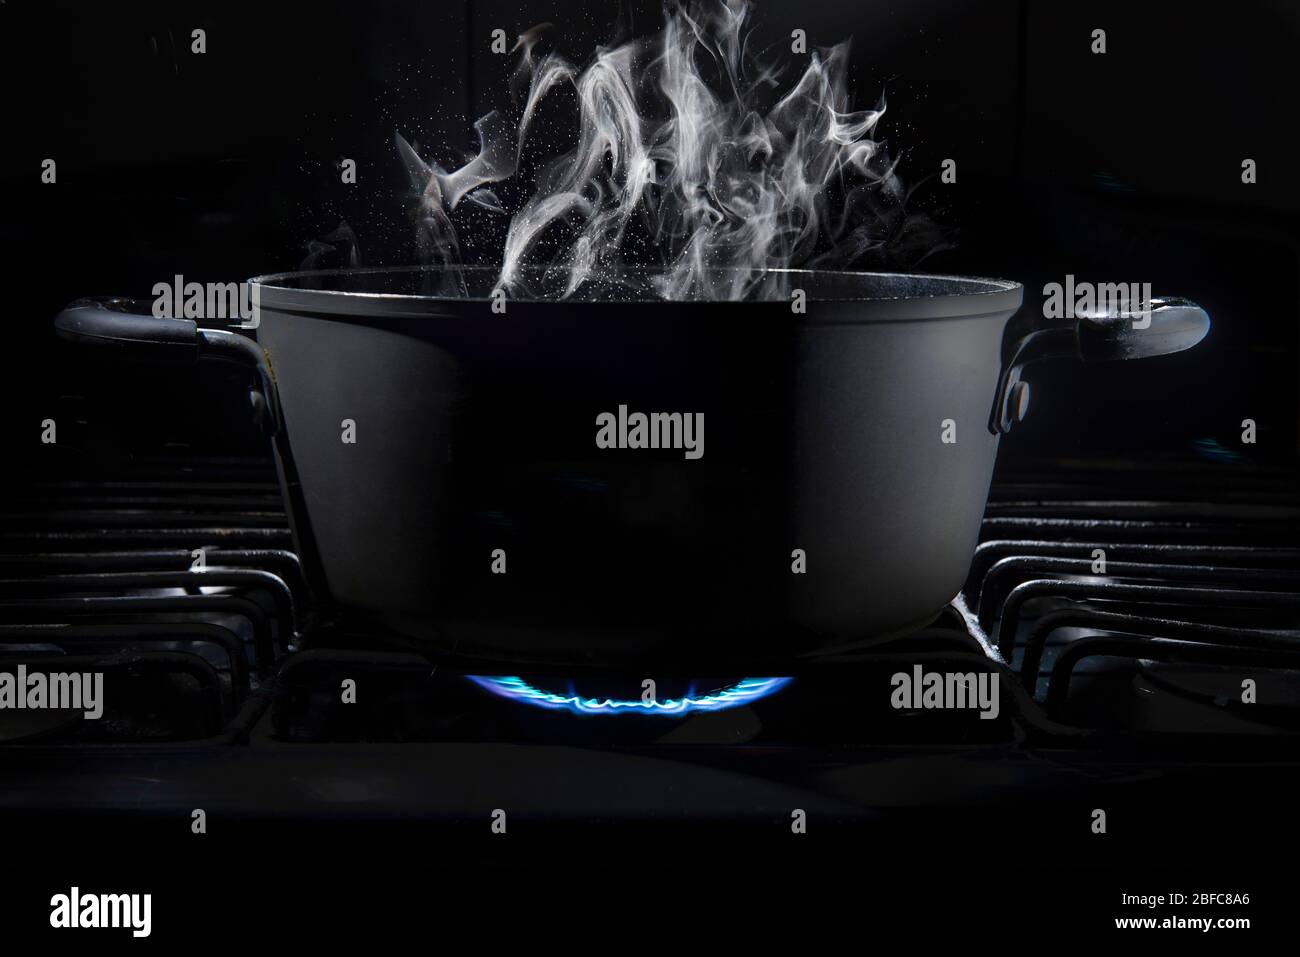 https://c8.alamy.com/comp/2BFC8A6/cooking-pot-on-stove-fire-with-food-inside-in-a-dark-kitchen-and-a-black-background-with-steam-coming-out-of-the-cooking-pot-low-key-light-2BFC8A6.jpg